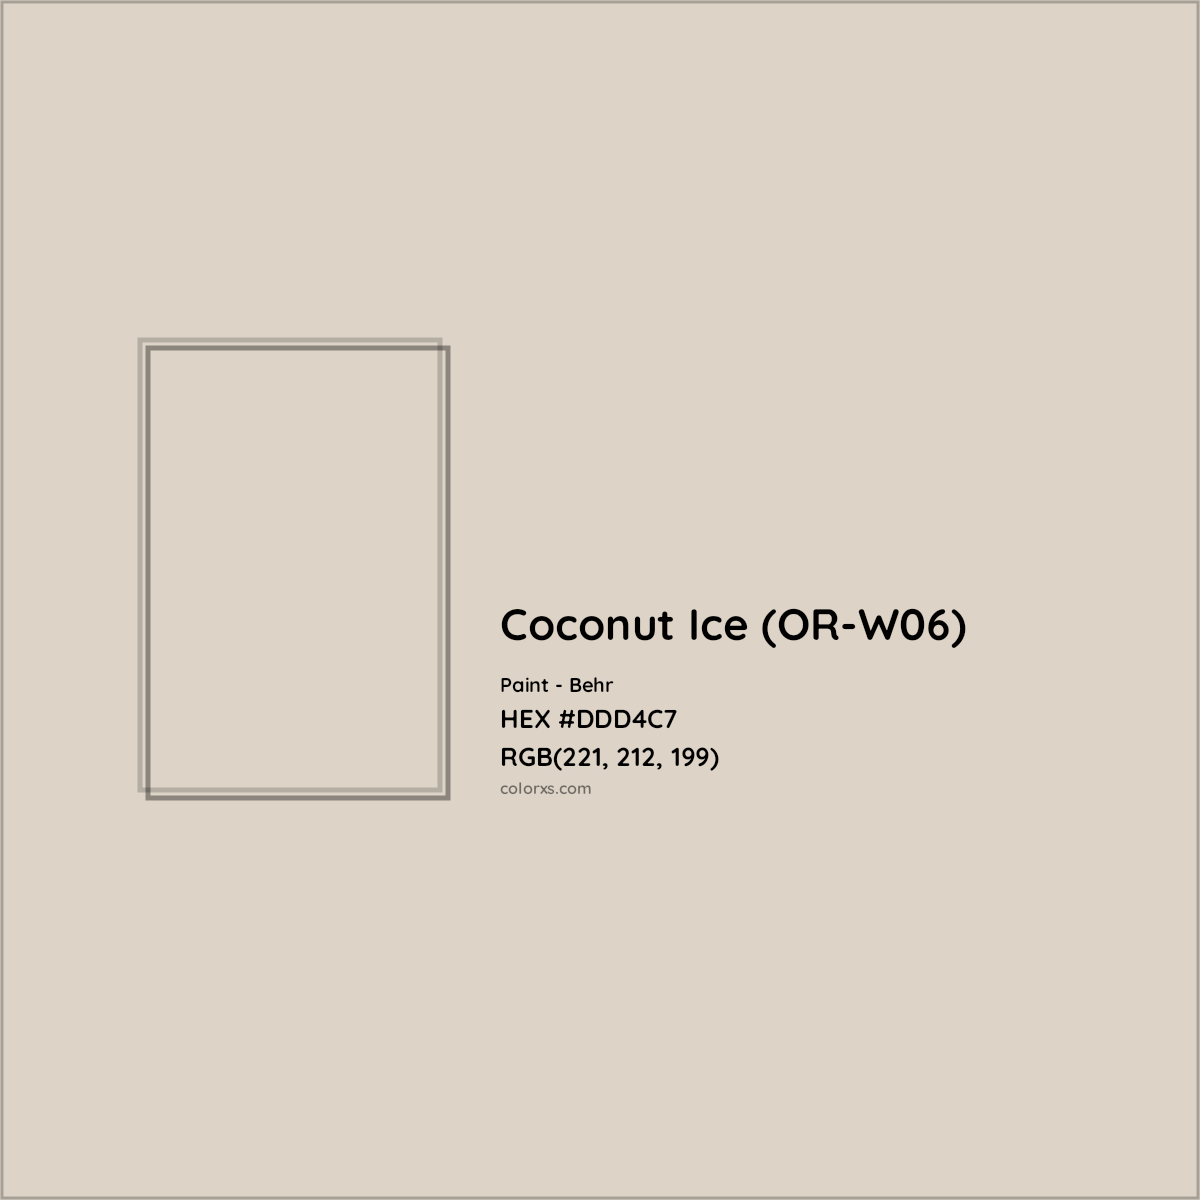 HEX #DDD4C7 Coconut Ice (OR-W06) Paint Behr - Color Code